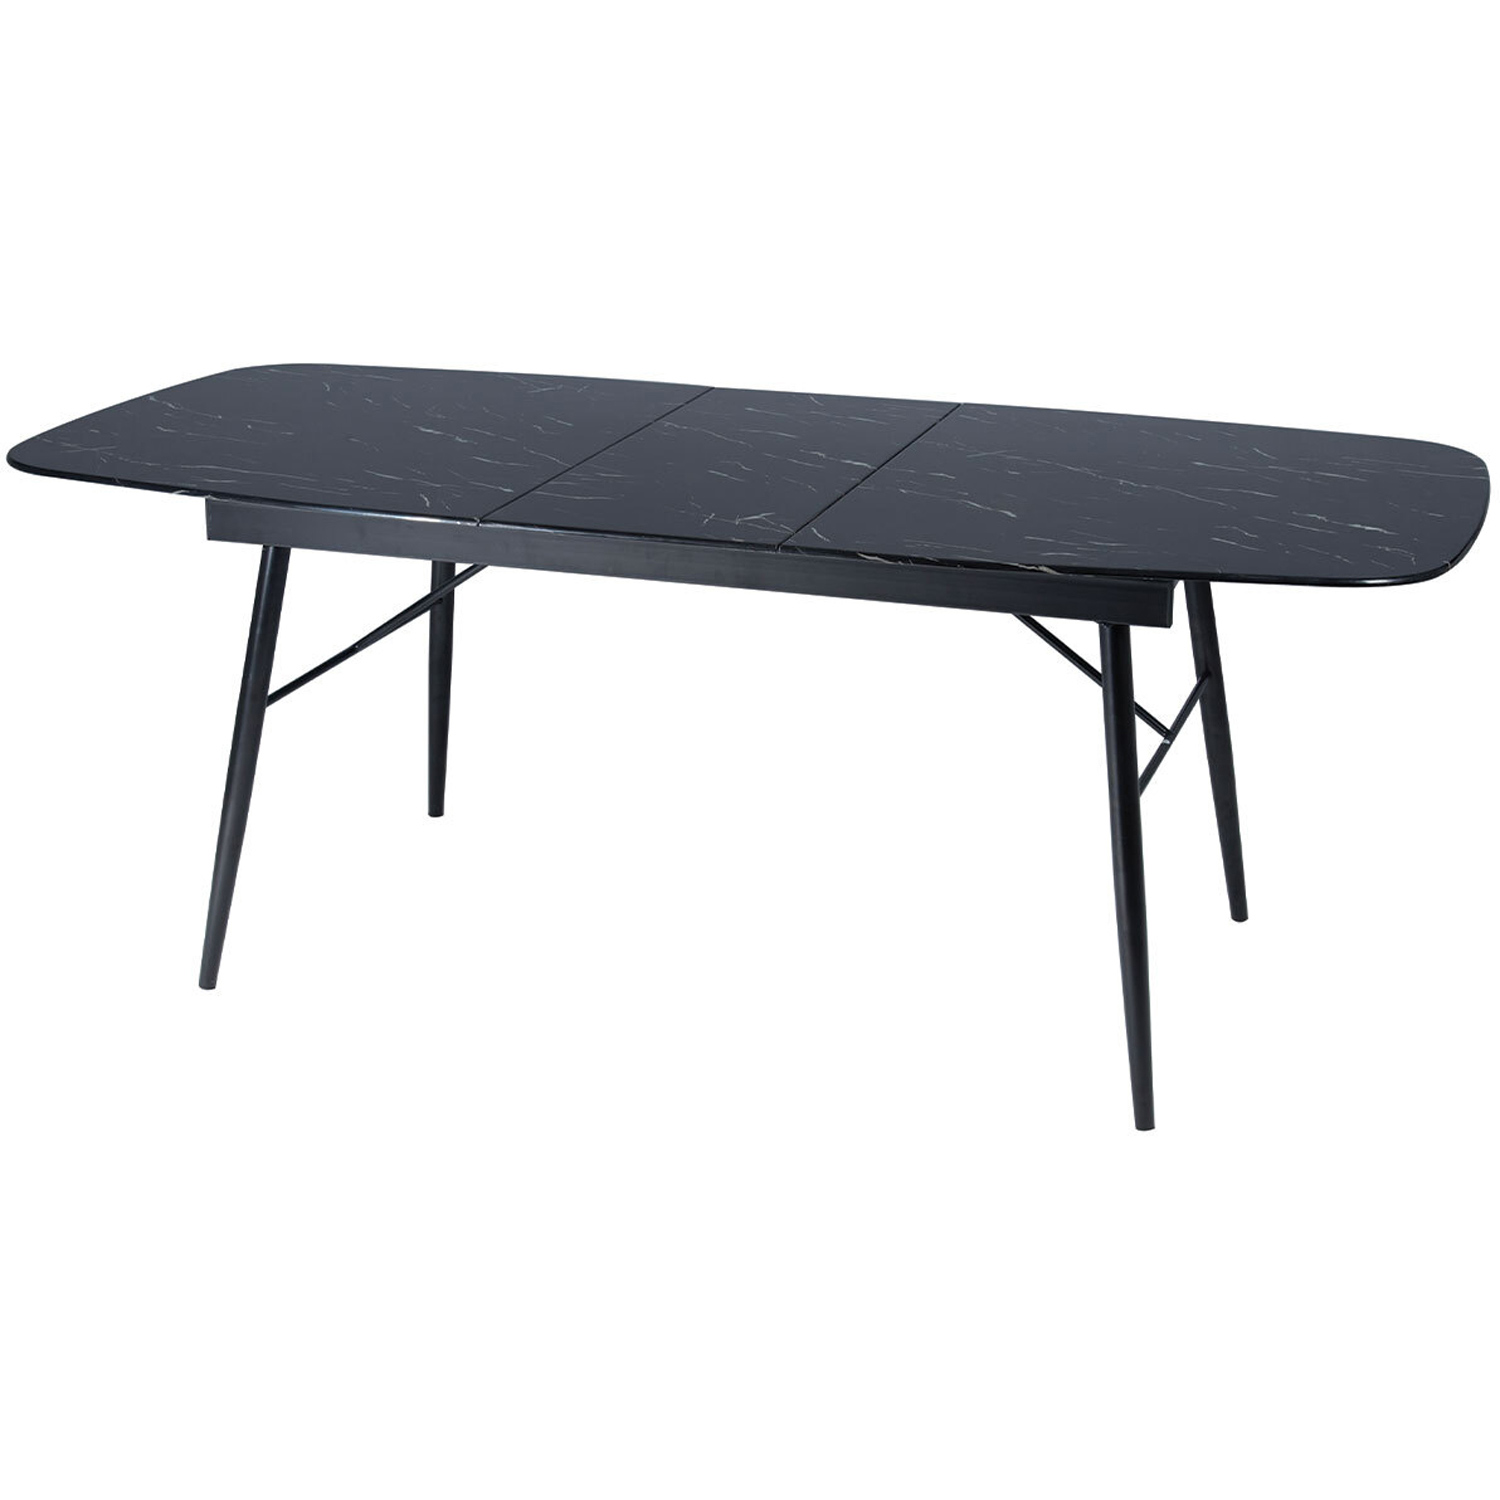 Sorrento Marble 6 Seater 160 to 200cm Extending Dining Table Black Image 5